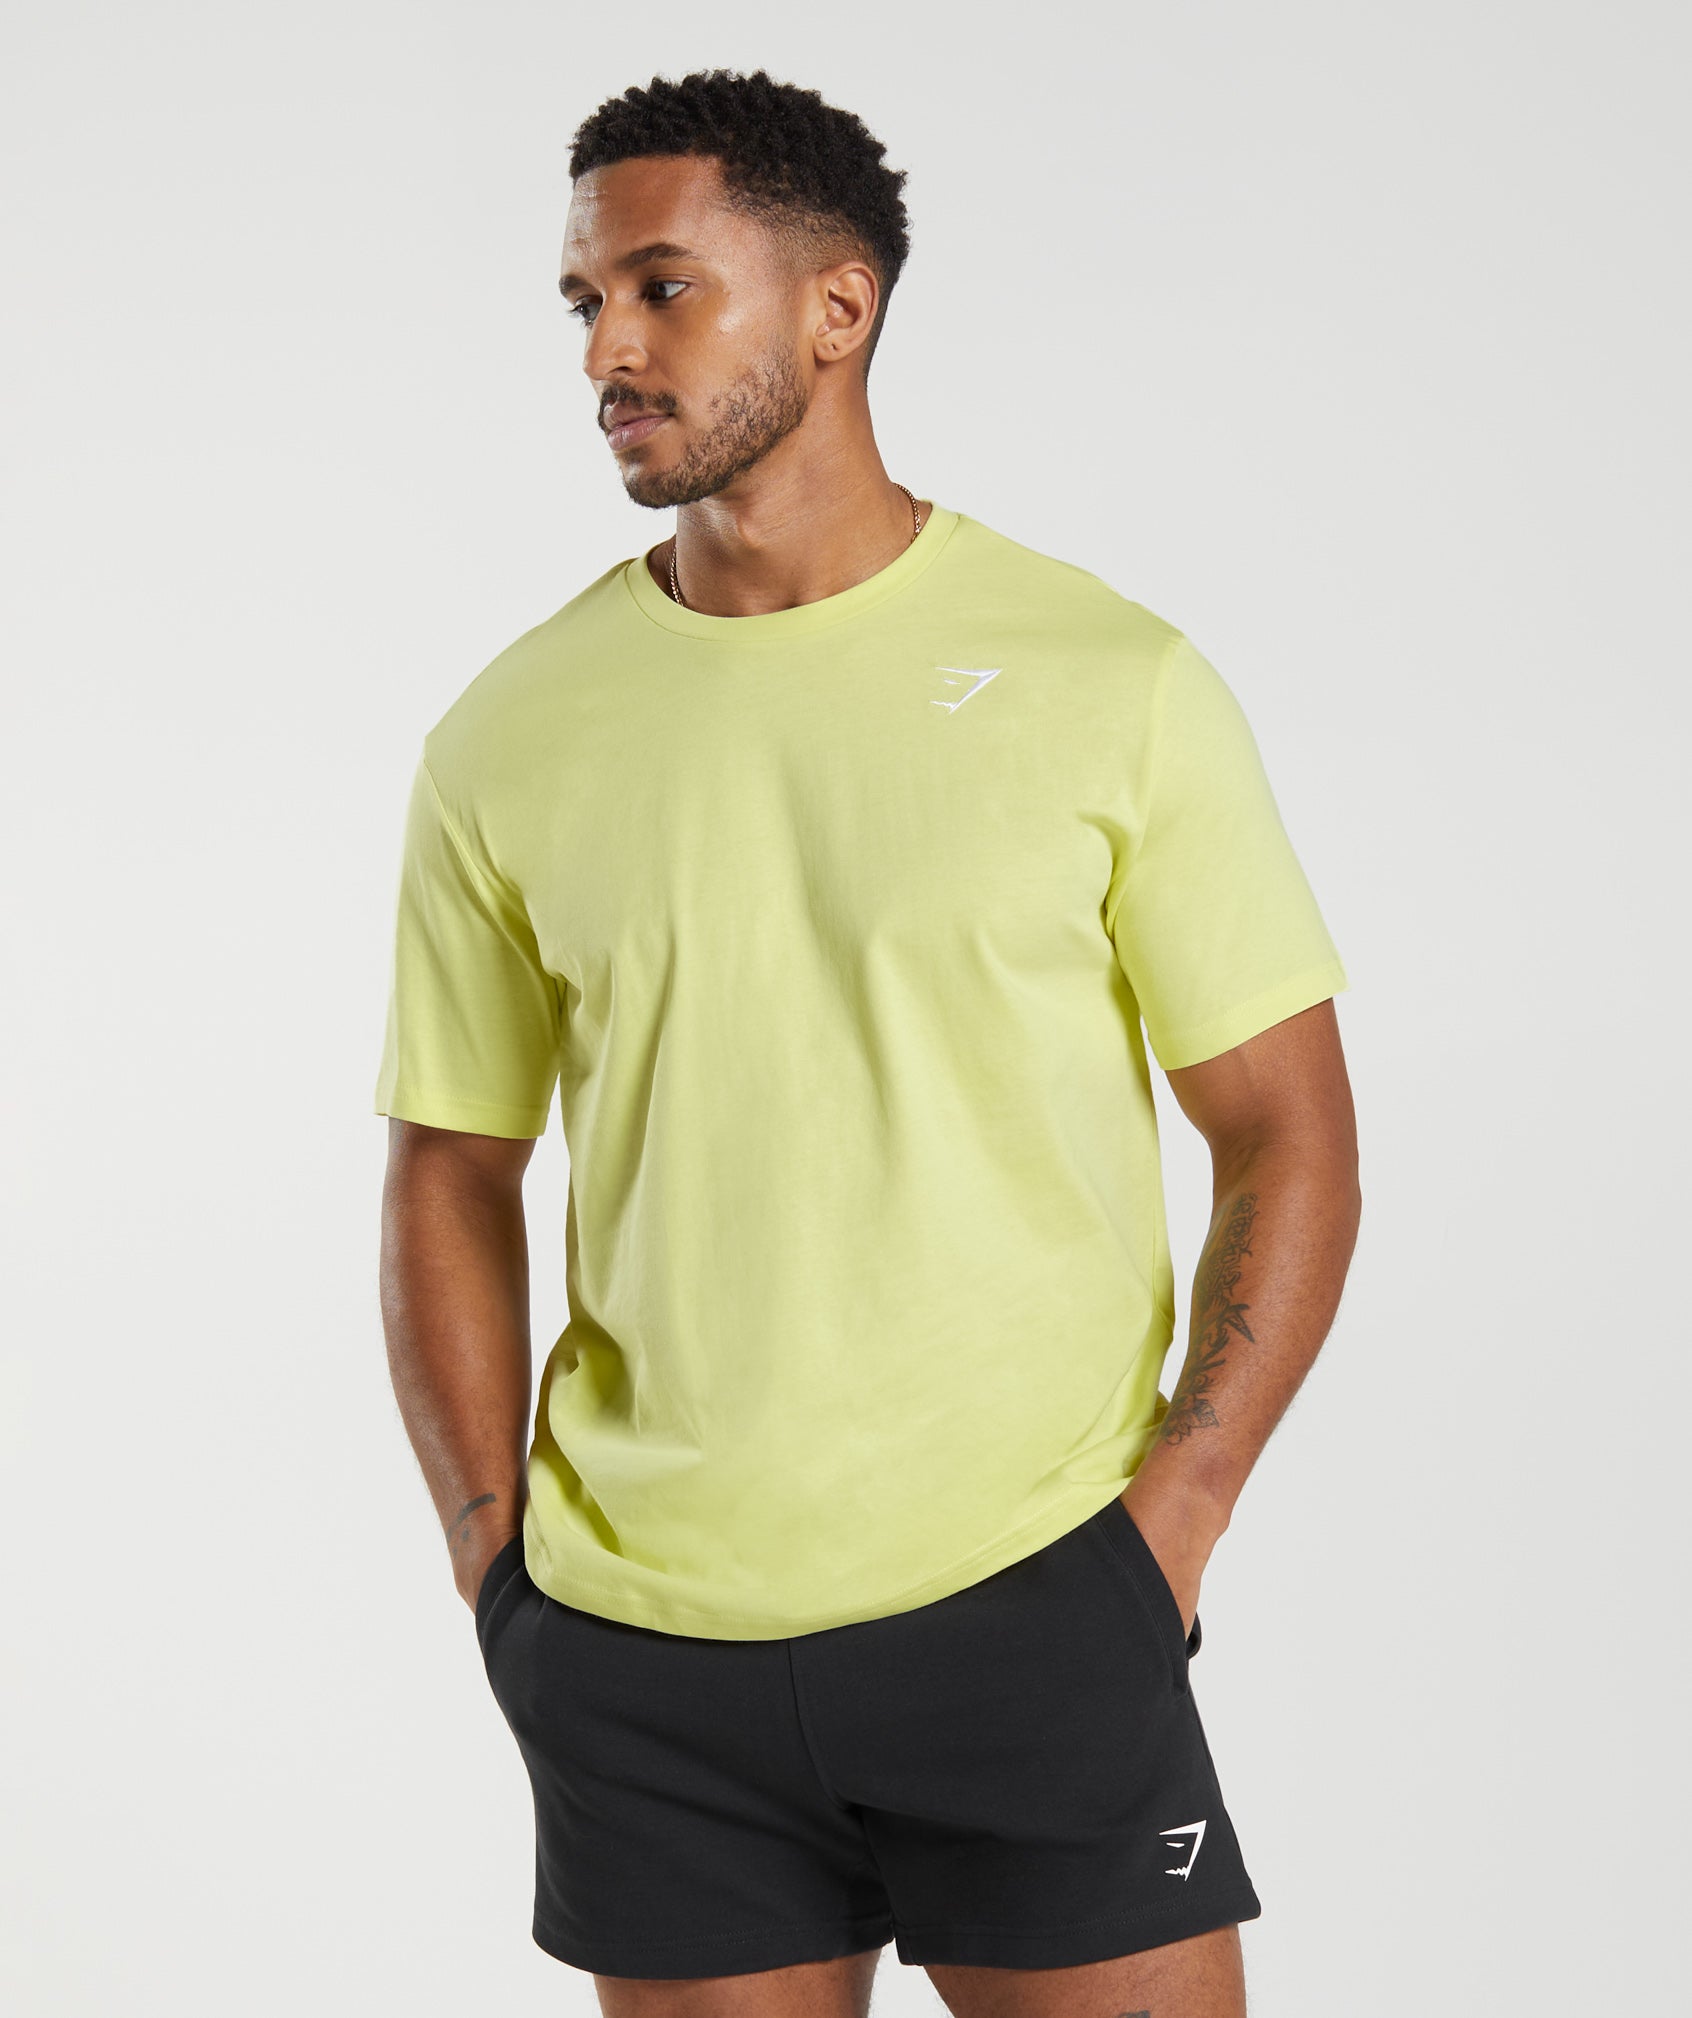 Crest T-Shirt in Firefly Green - view 1